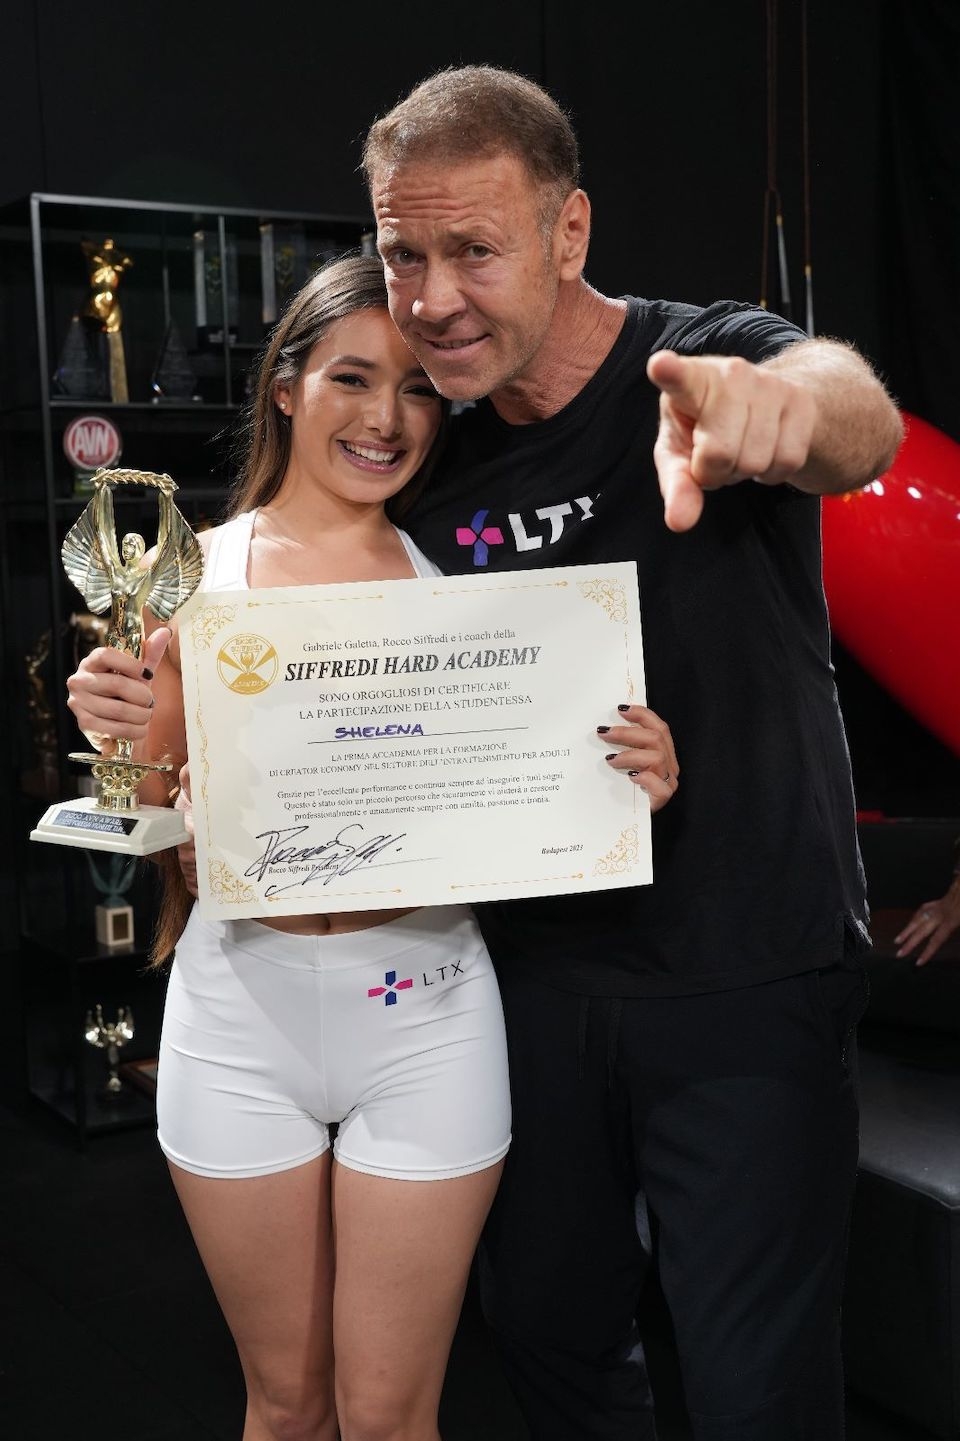 Rocco Siffredi's 'Hard Academy' Winner Shelena 'This Is Just the